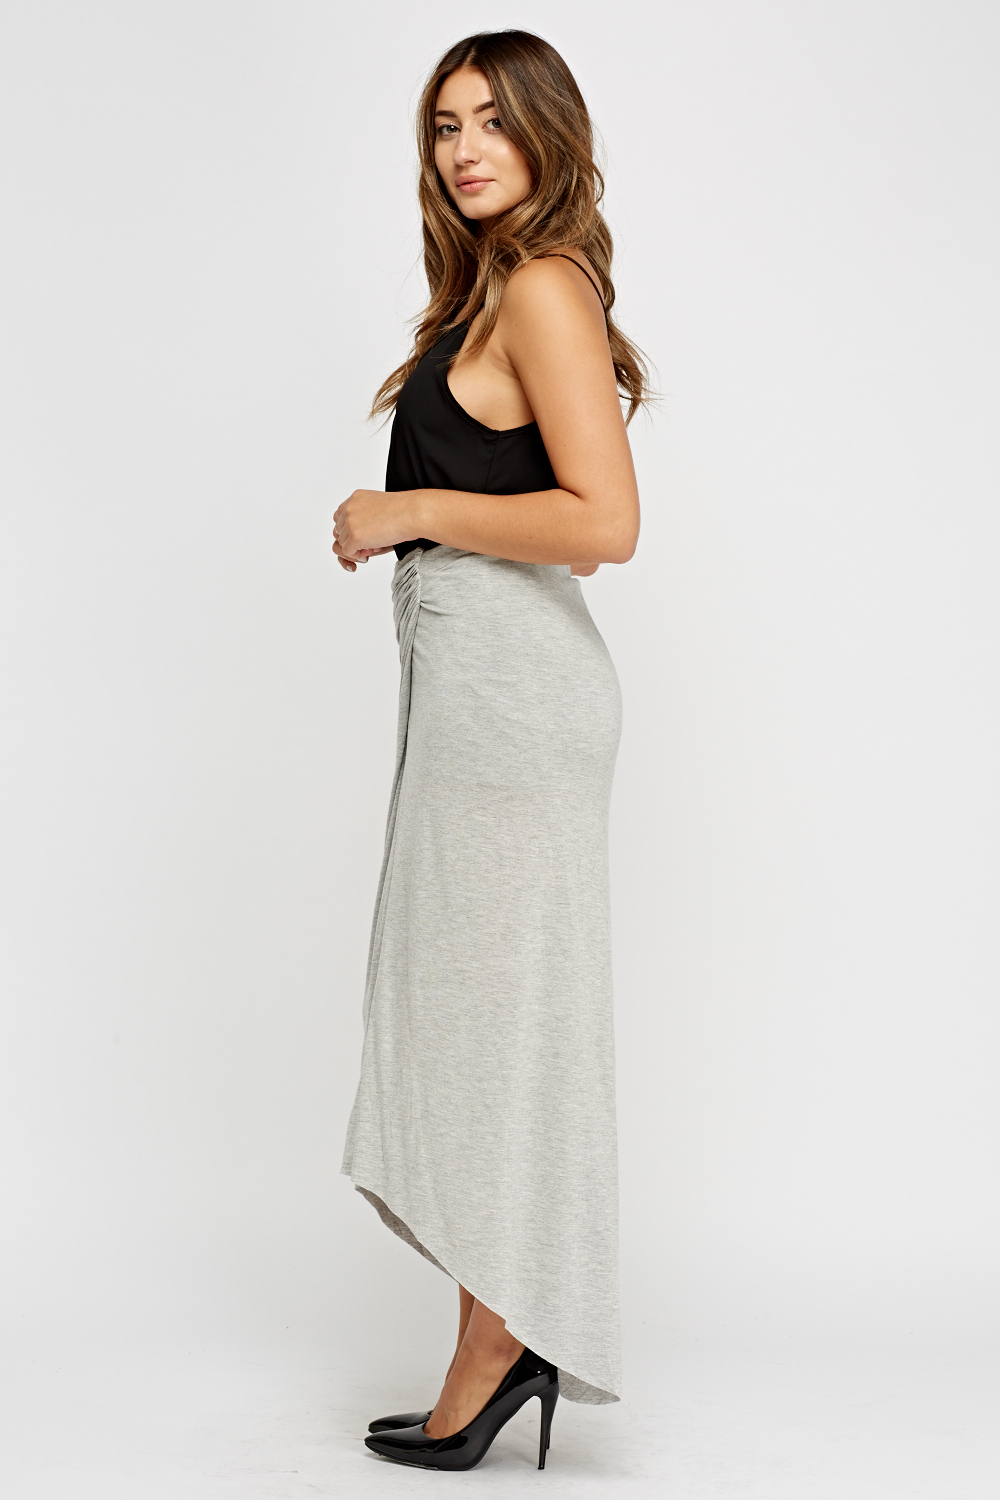 Ruched Grey Bodycon Maxi Skirt - Just $5